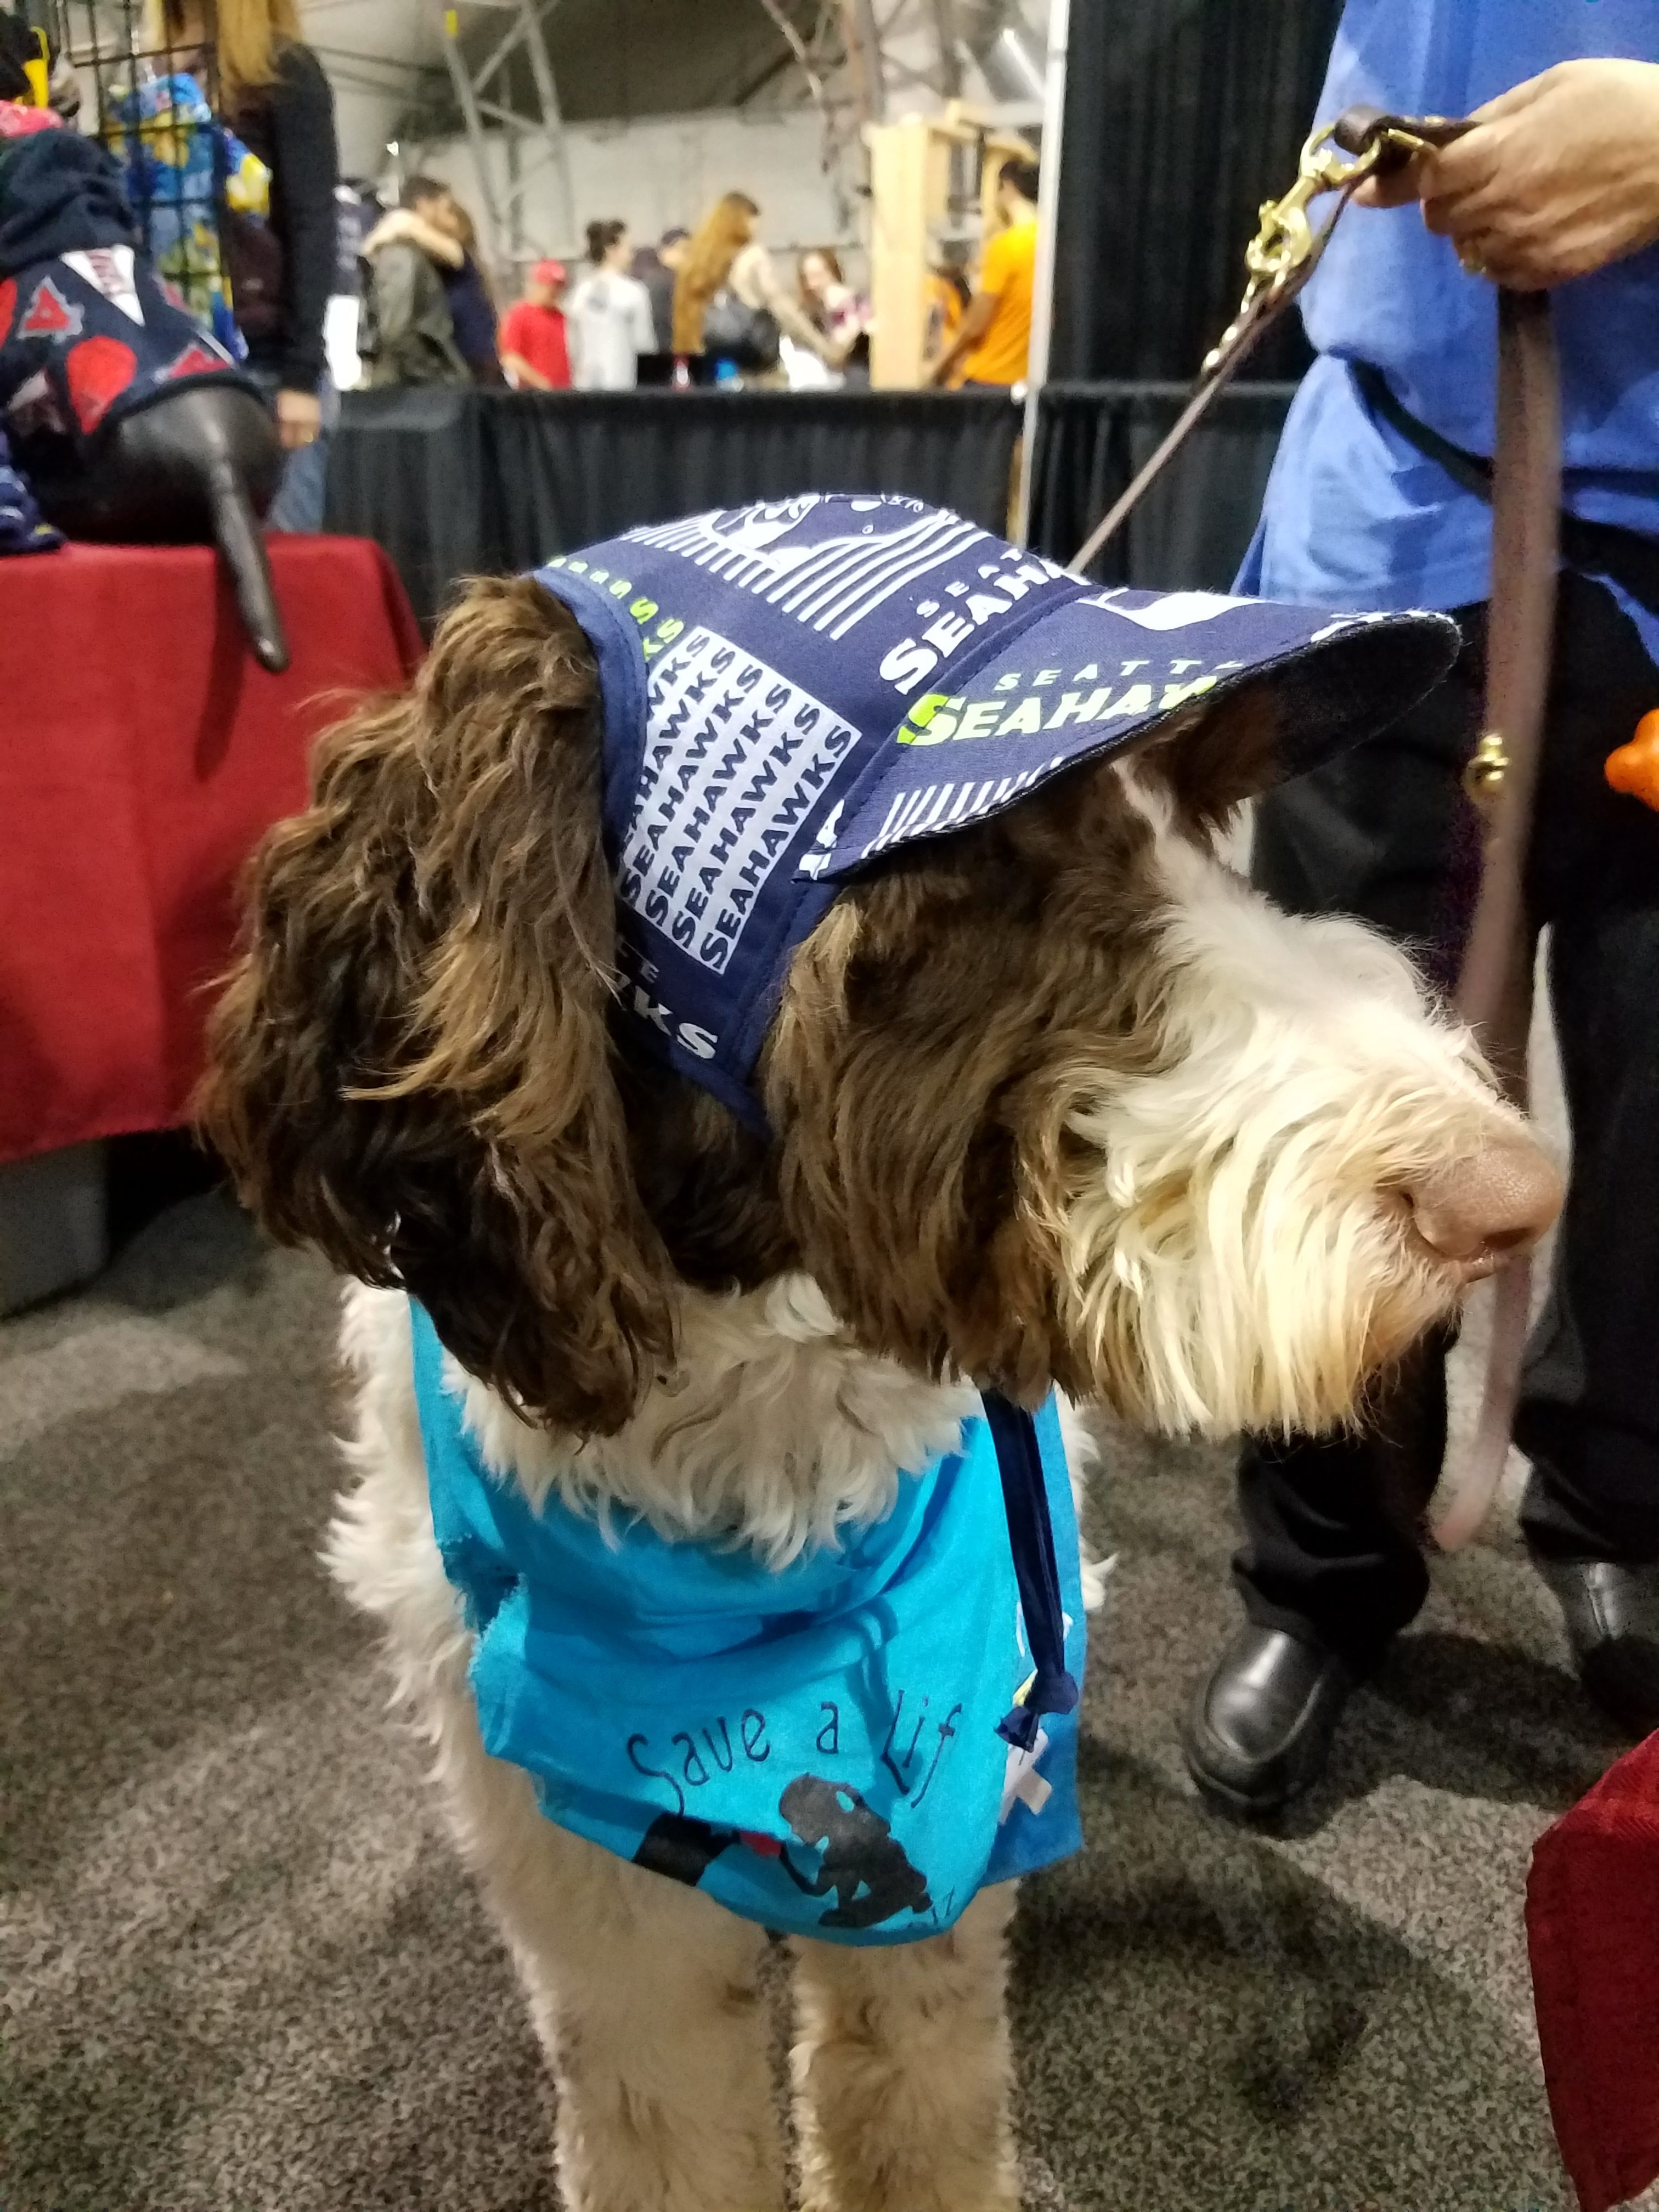 chicago cubs dog costume